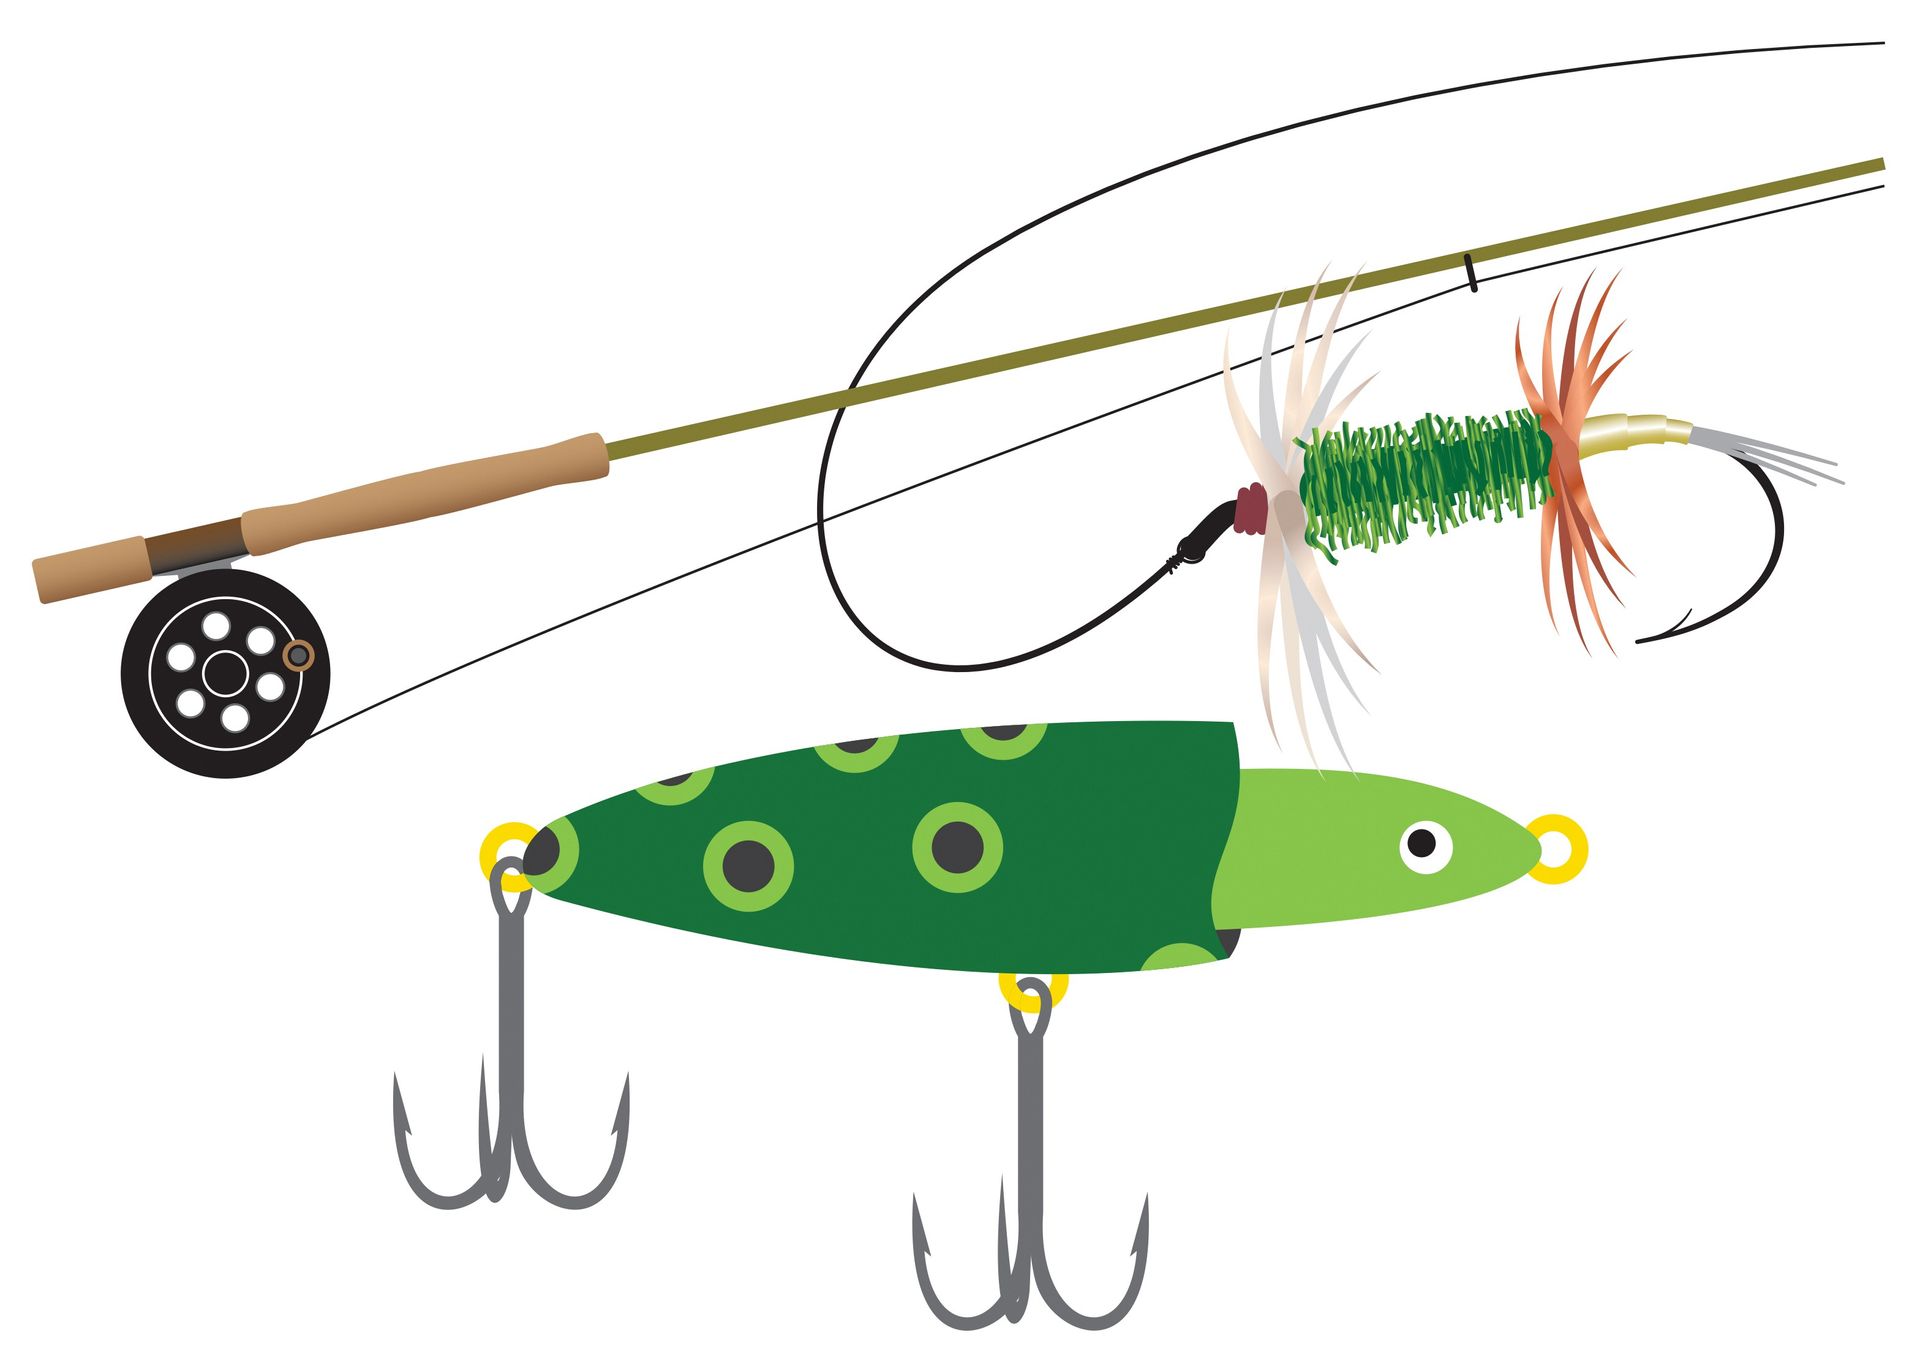 A drawing of a fishing pole and lure.